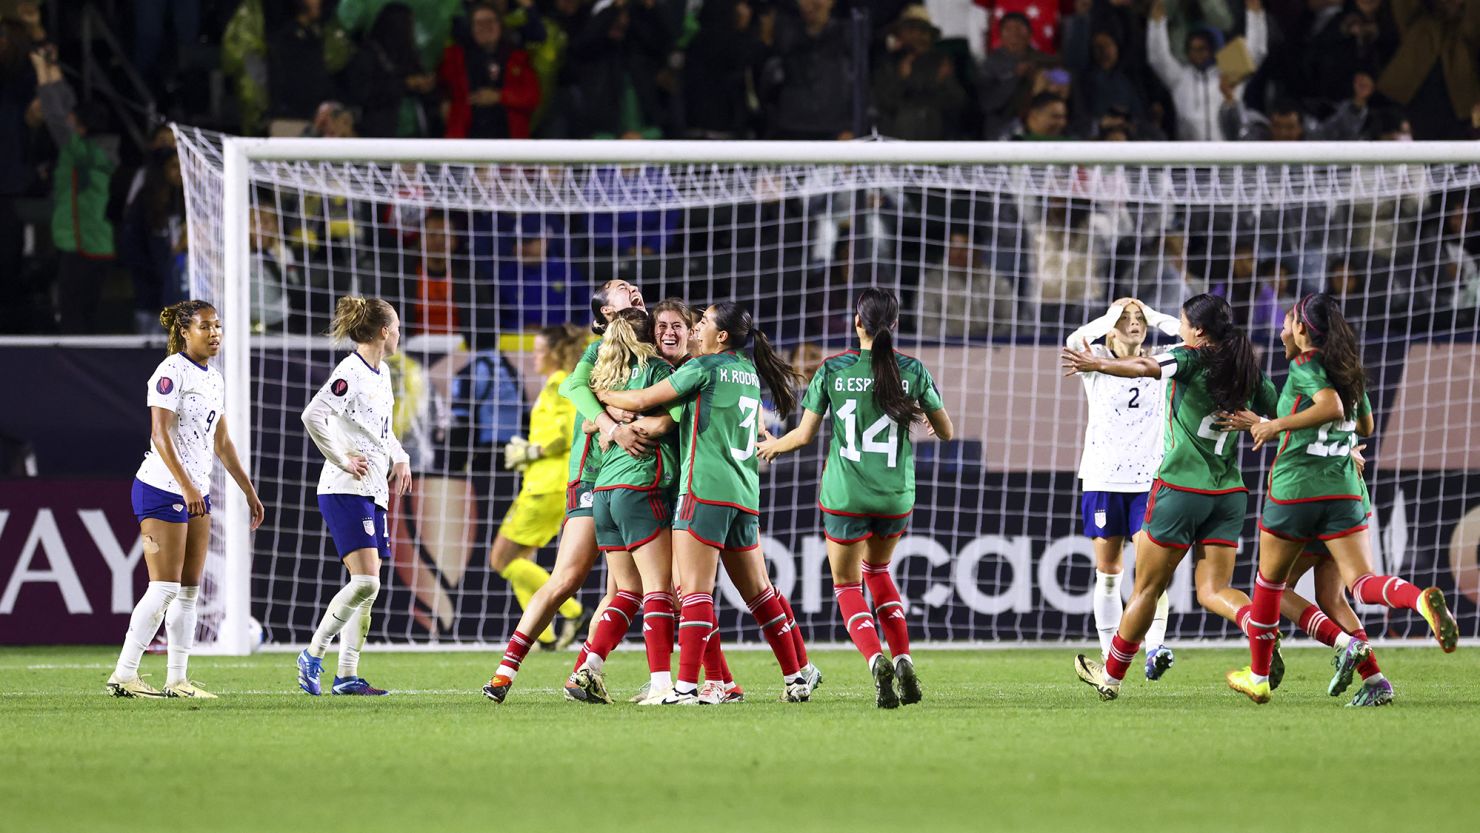 Mexico's Mayra Pelayo-Bernal celebrates with her teammates after scoring a goal against the US.